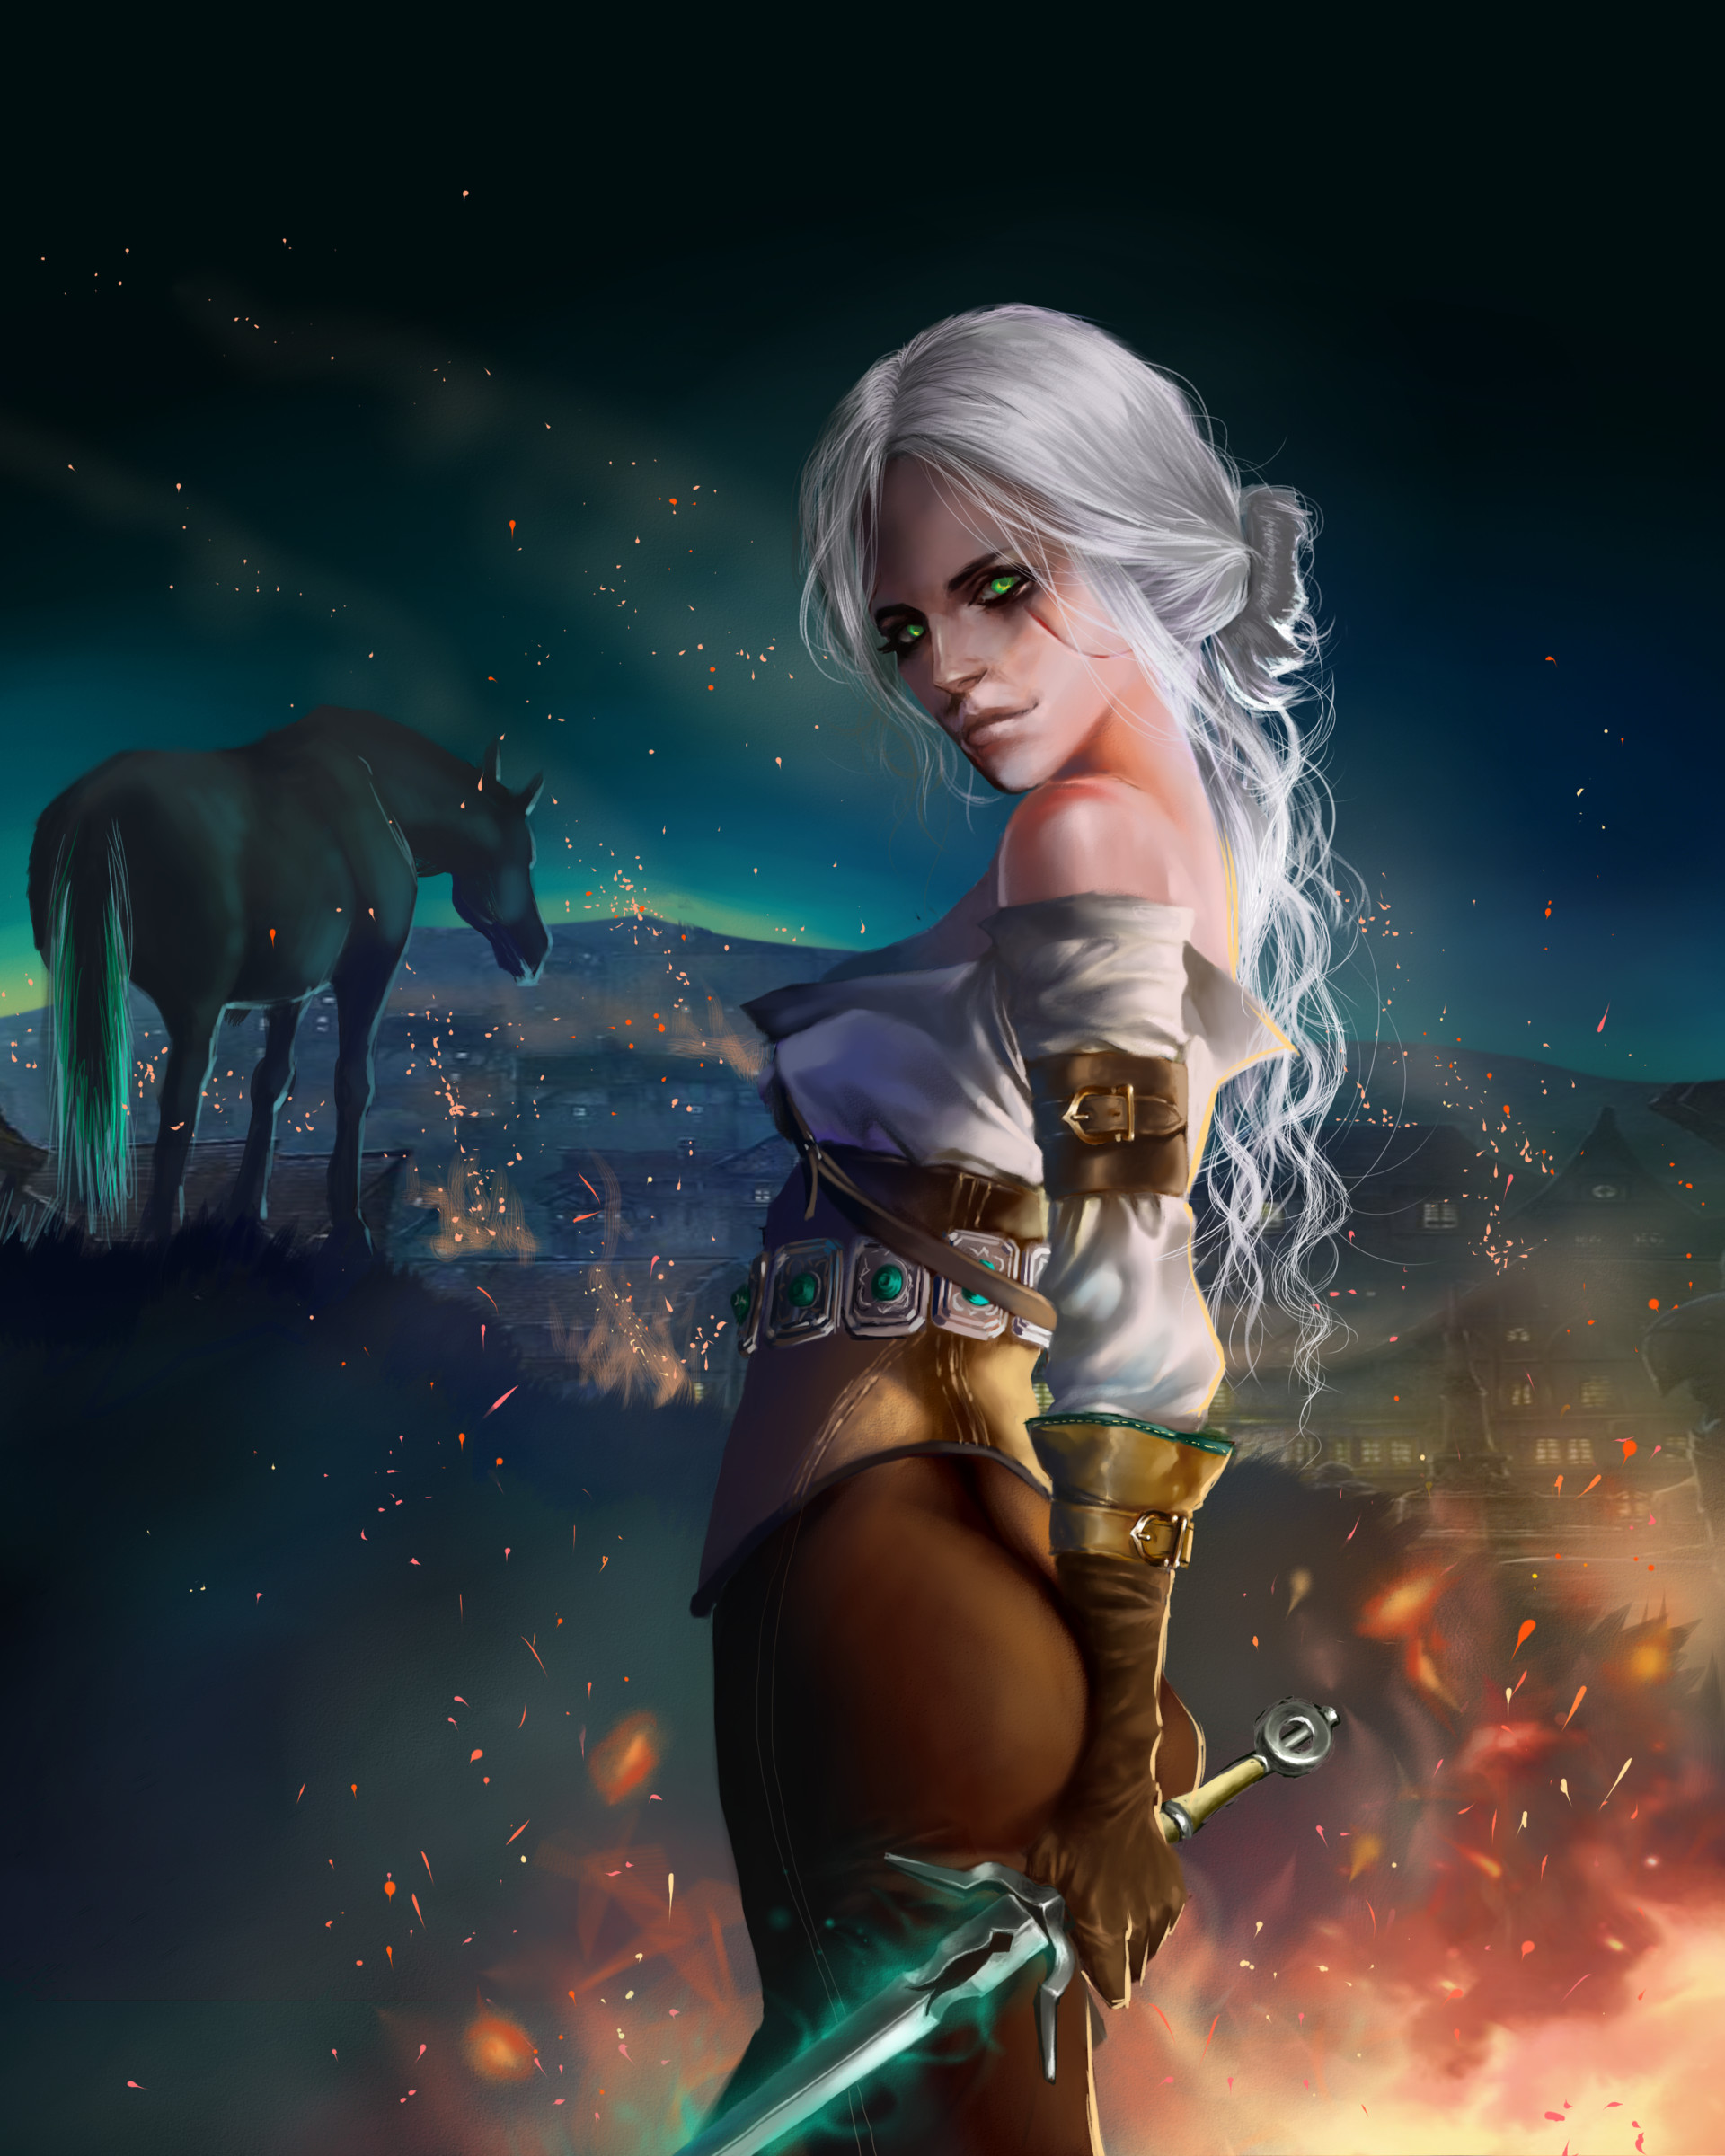 As I promised - new character fanart SPEEDPAINT from The Witcher franchise ...